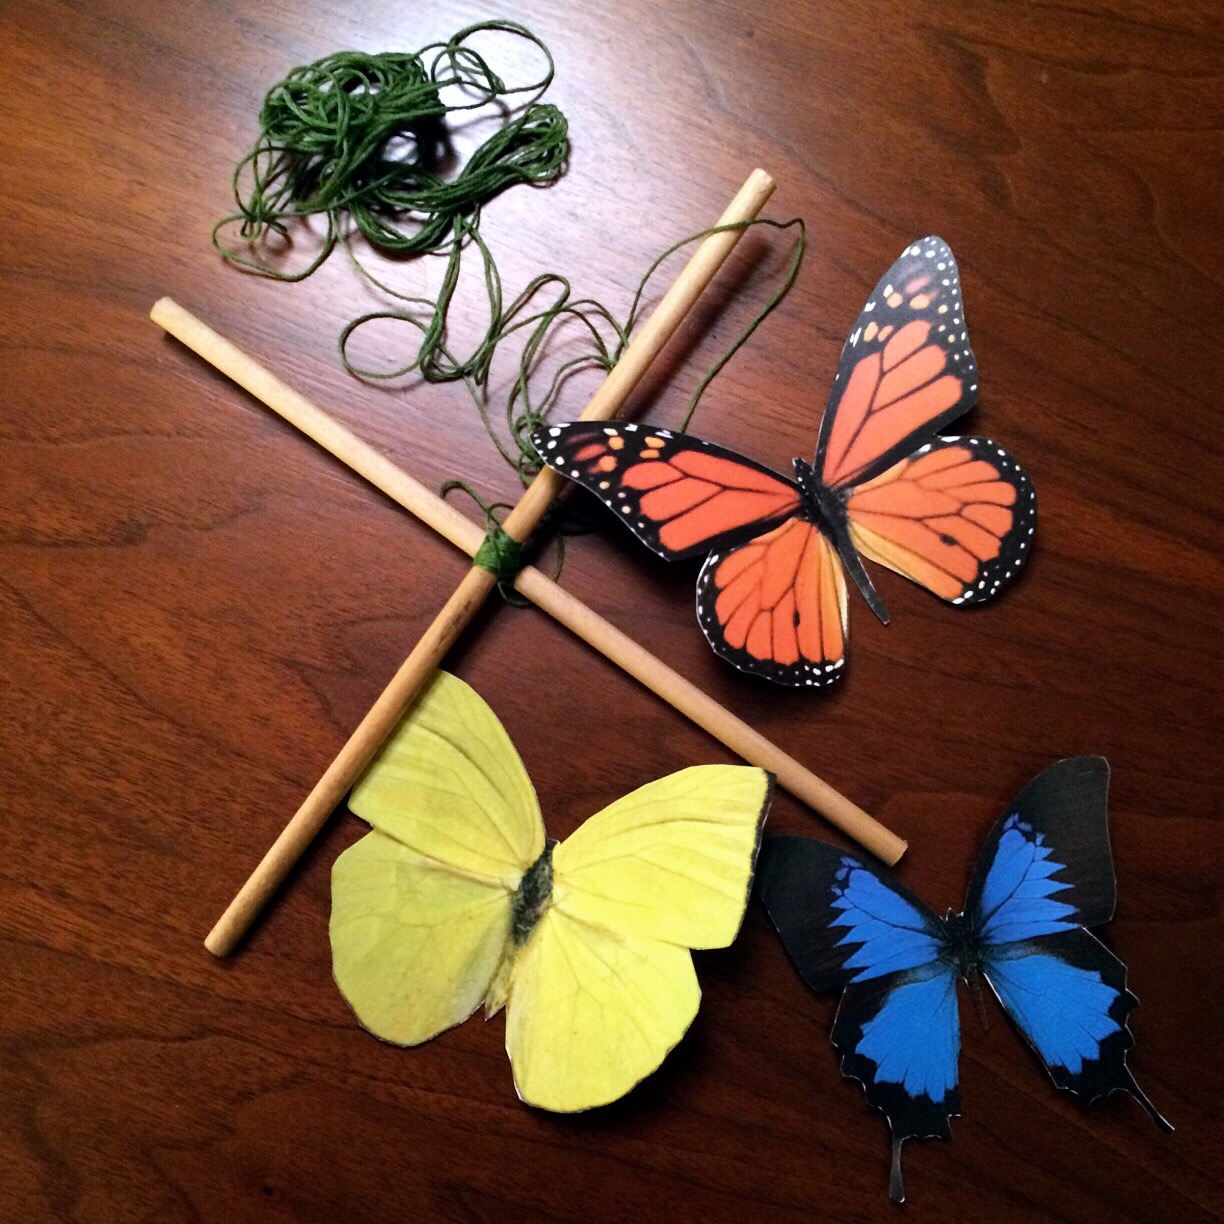 Behind Mytutorlist.com: Paper Butterflies For A Pretty Butterfly Mobile